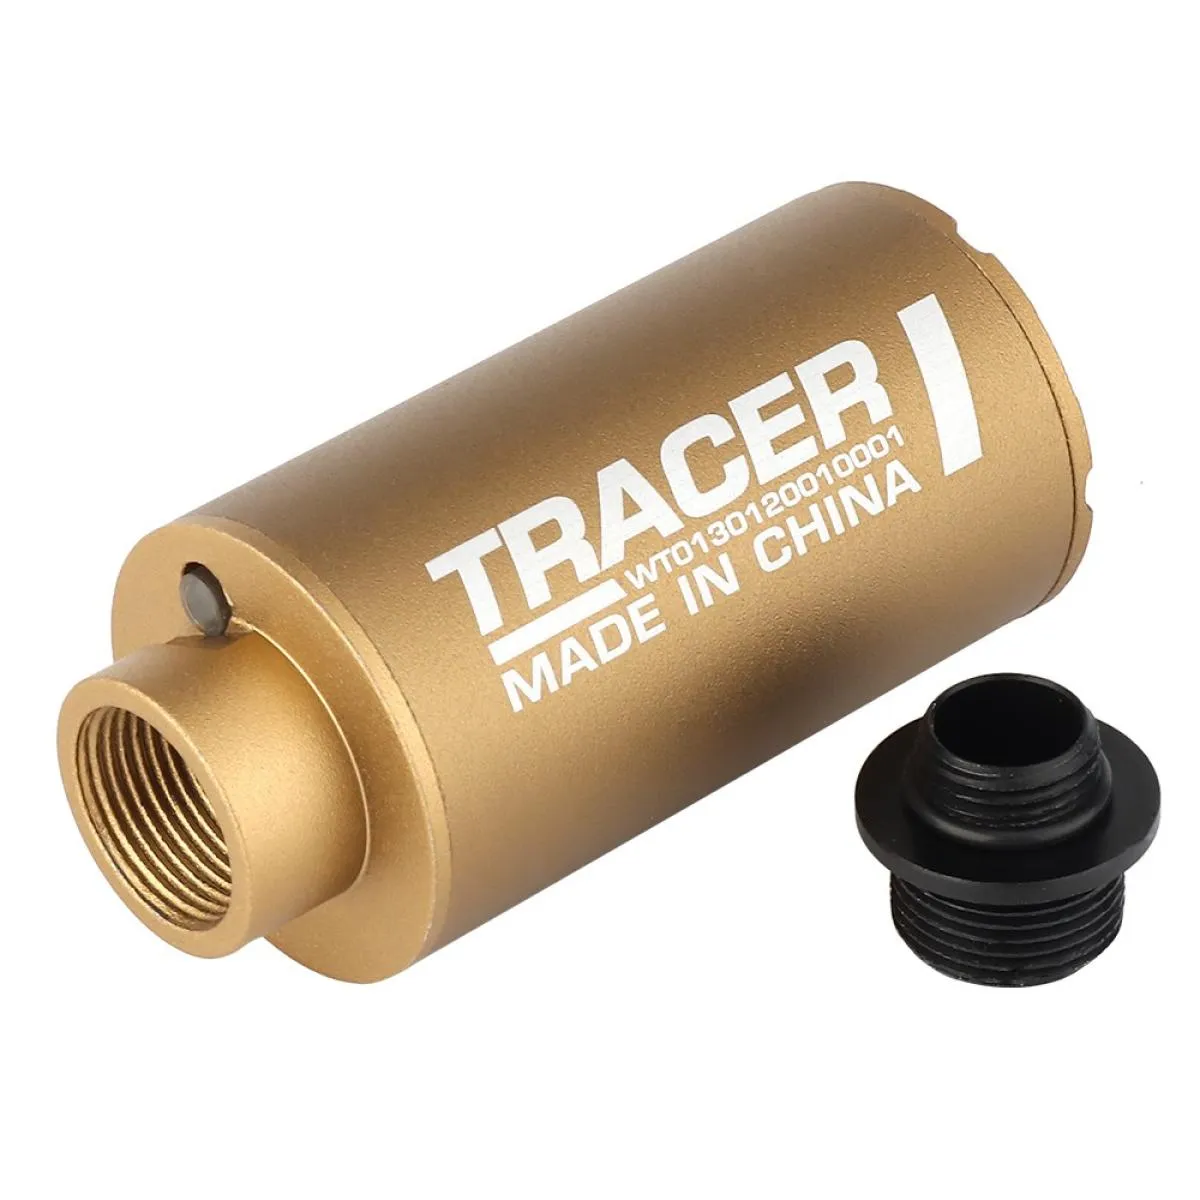 Wosport Tracer Unit Autotracer I 14mm CCW Dark Earth